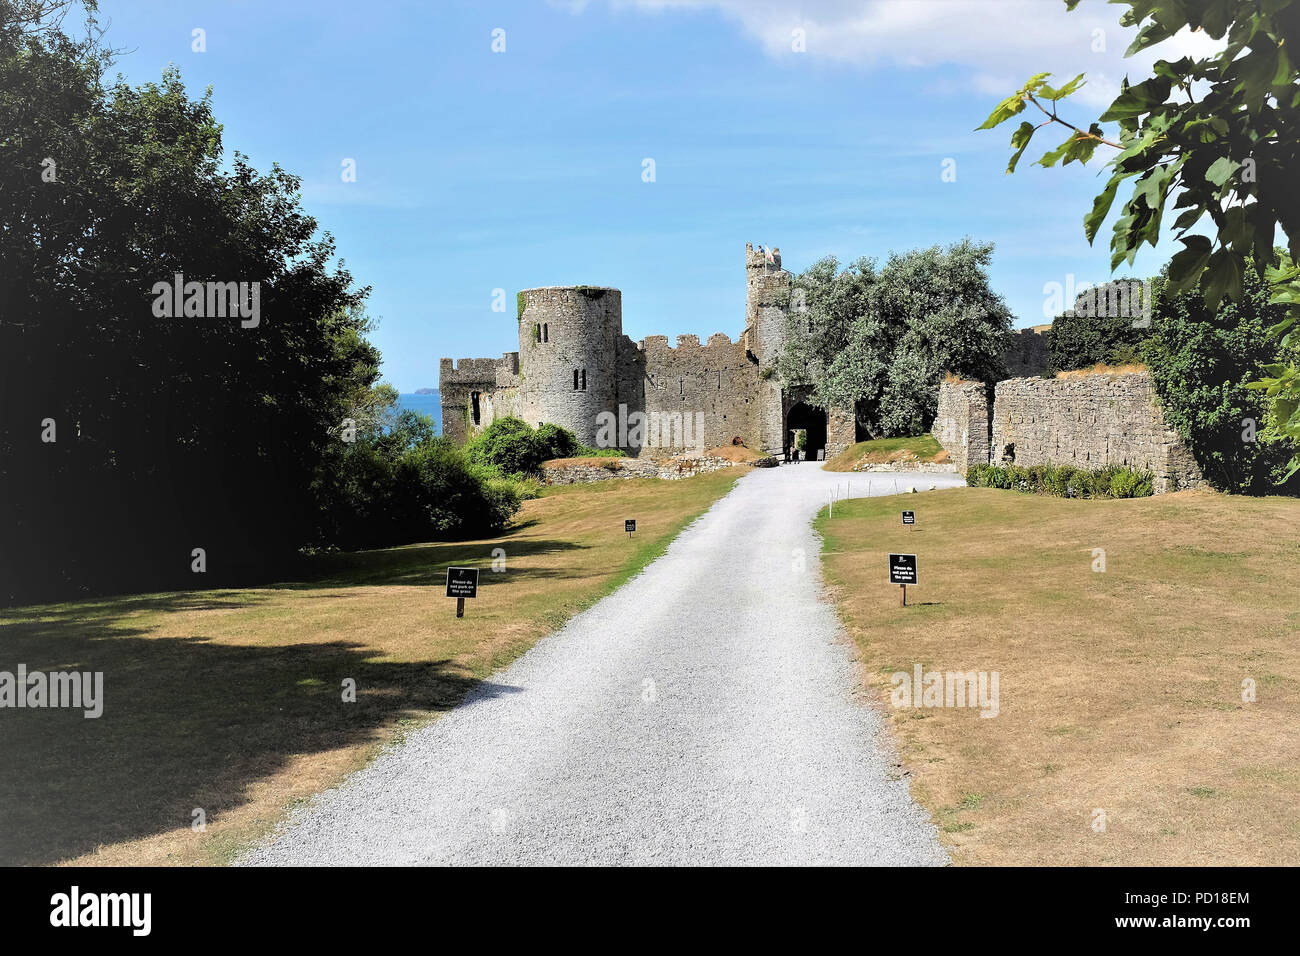 Manorbier, Pembrokeshire, South Wales, UK. July 25, 2018. Manorbier castle main entrance from the North East with the sea in the background at Manorbi Stock Photo